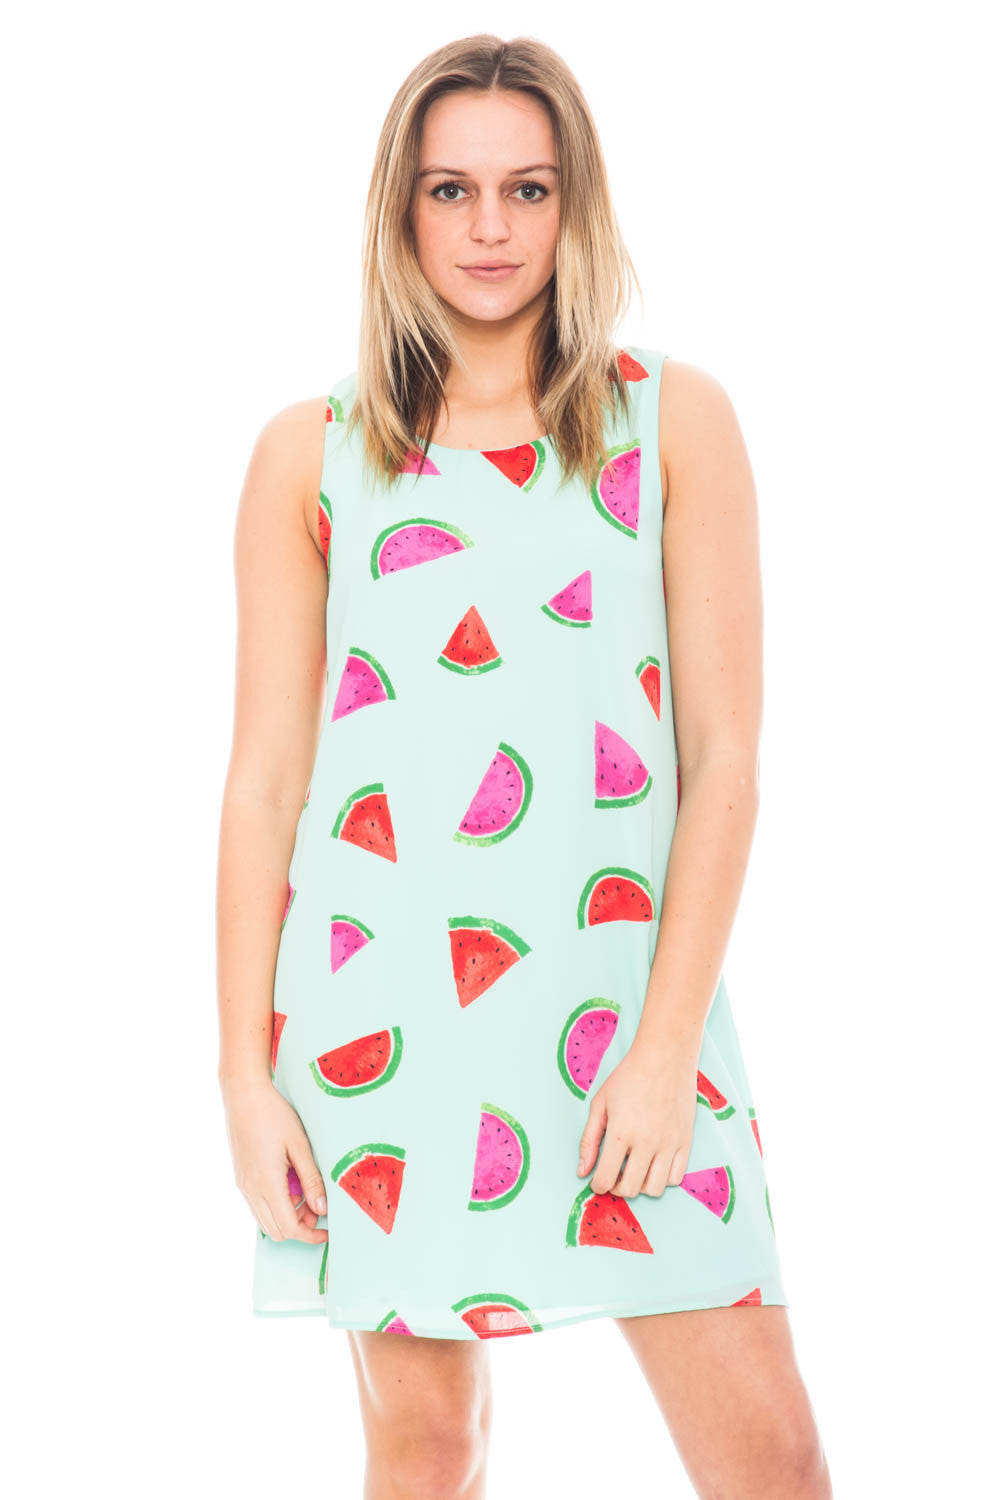 Dress - Watermelon Shift Dress with Strappy Back Detail by Everly